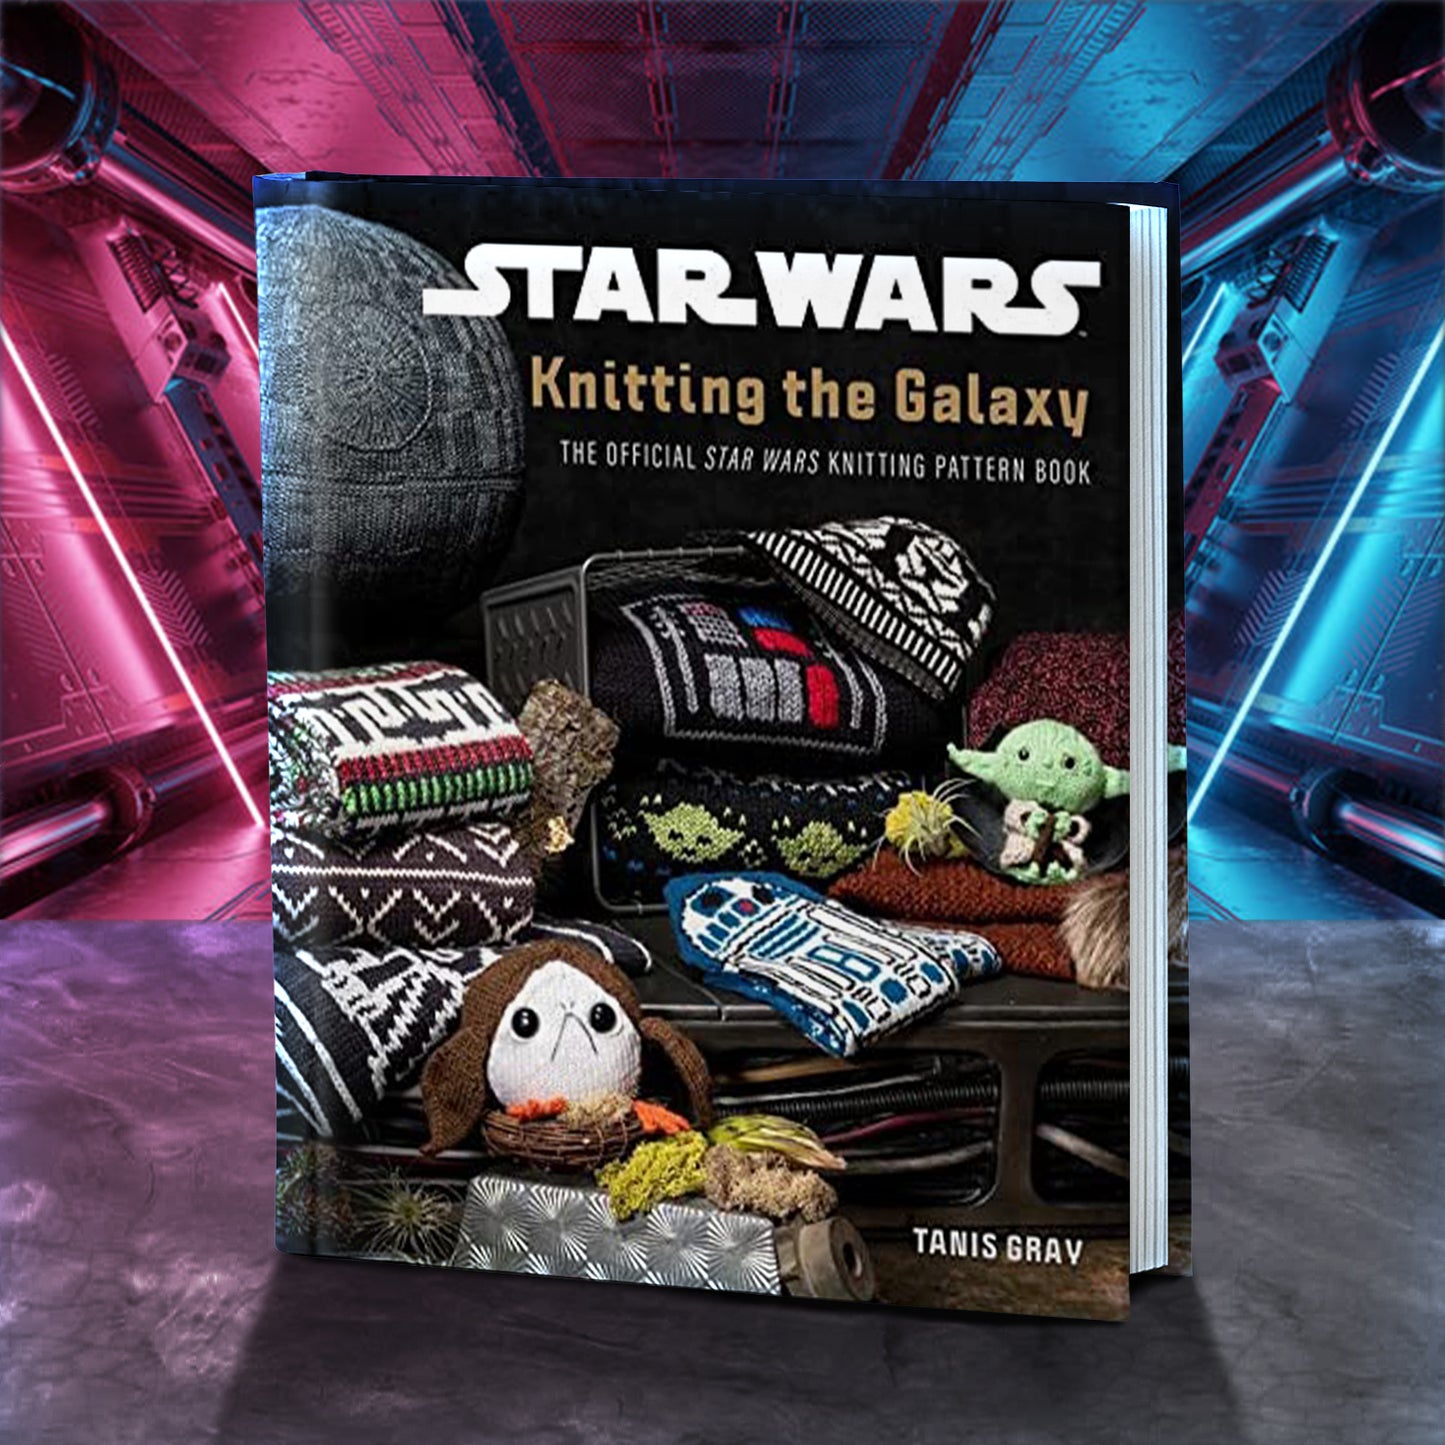 A book standing on a marble table. On the cover are various characters and ships from the Star Wars movies in the forms of knit scarves and sweaters. The book title “Star Wars: Knitting the Galaxy” is across the top in white and gold text. Behind the book is a spaceship corridor, lit in red and blue.